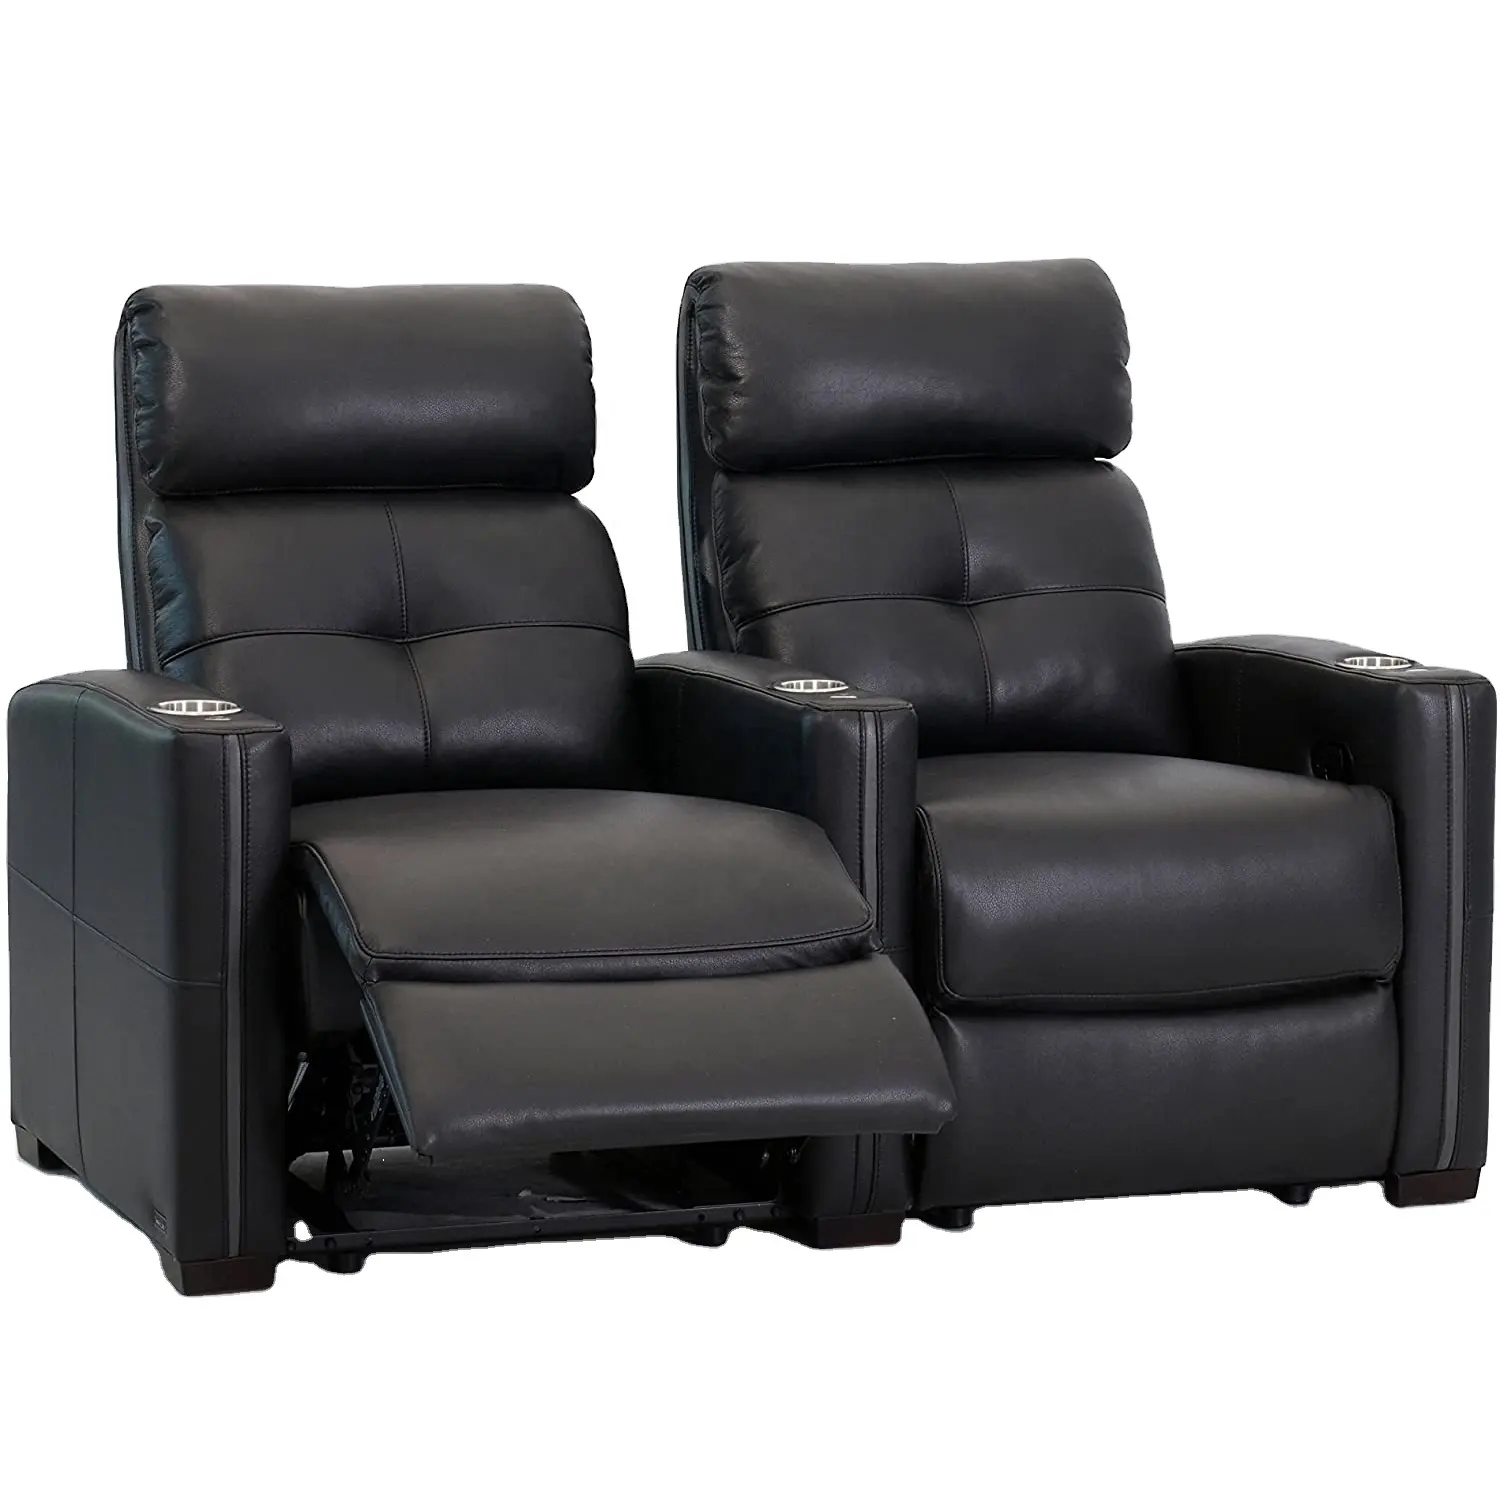 Geeksofa Luxury Style Electric Motion Recliner LoveSeat Faux Leather Home Theater Sofa Sets Black With Massage LED Lights